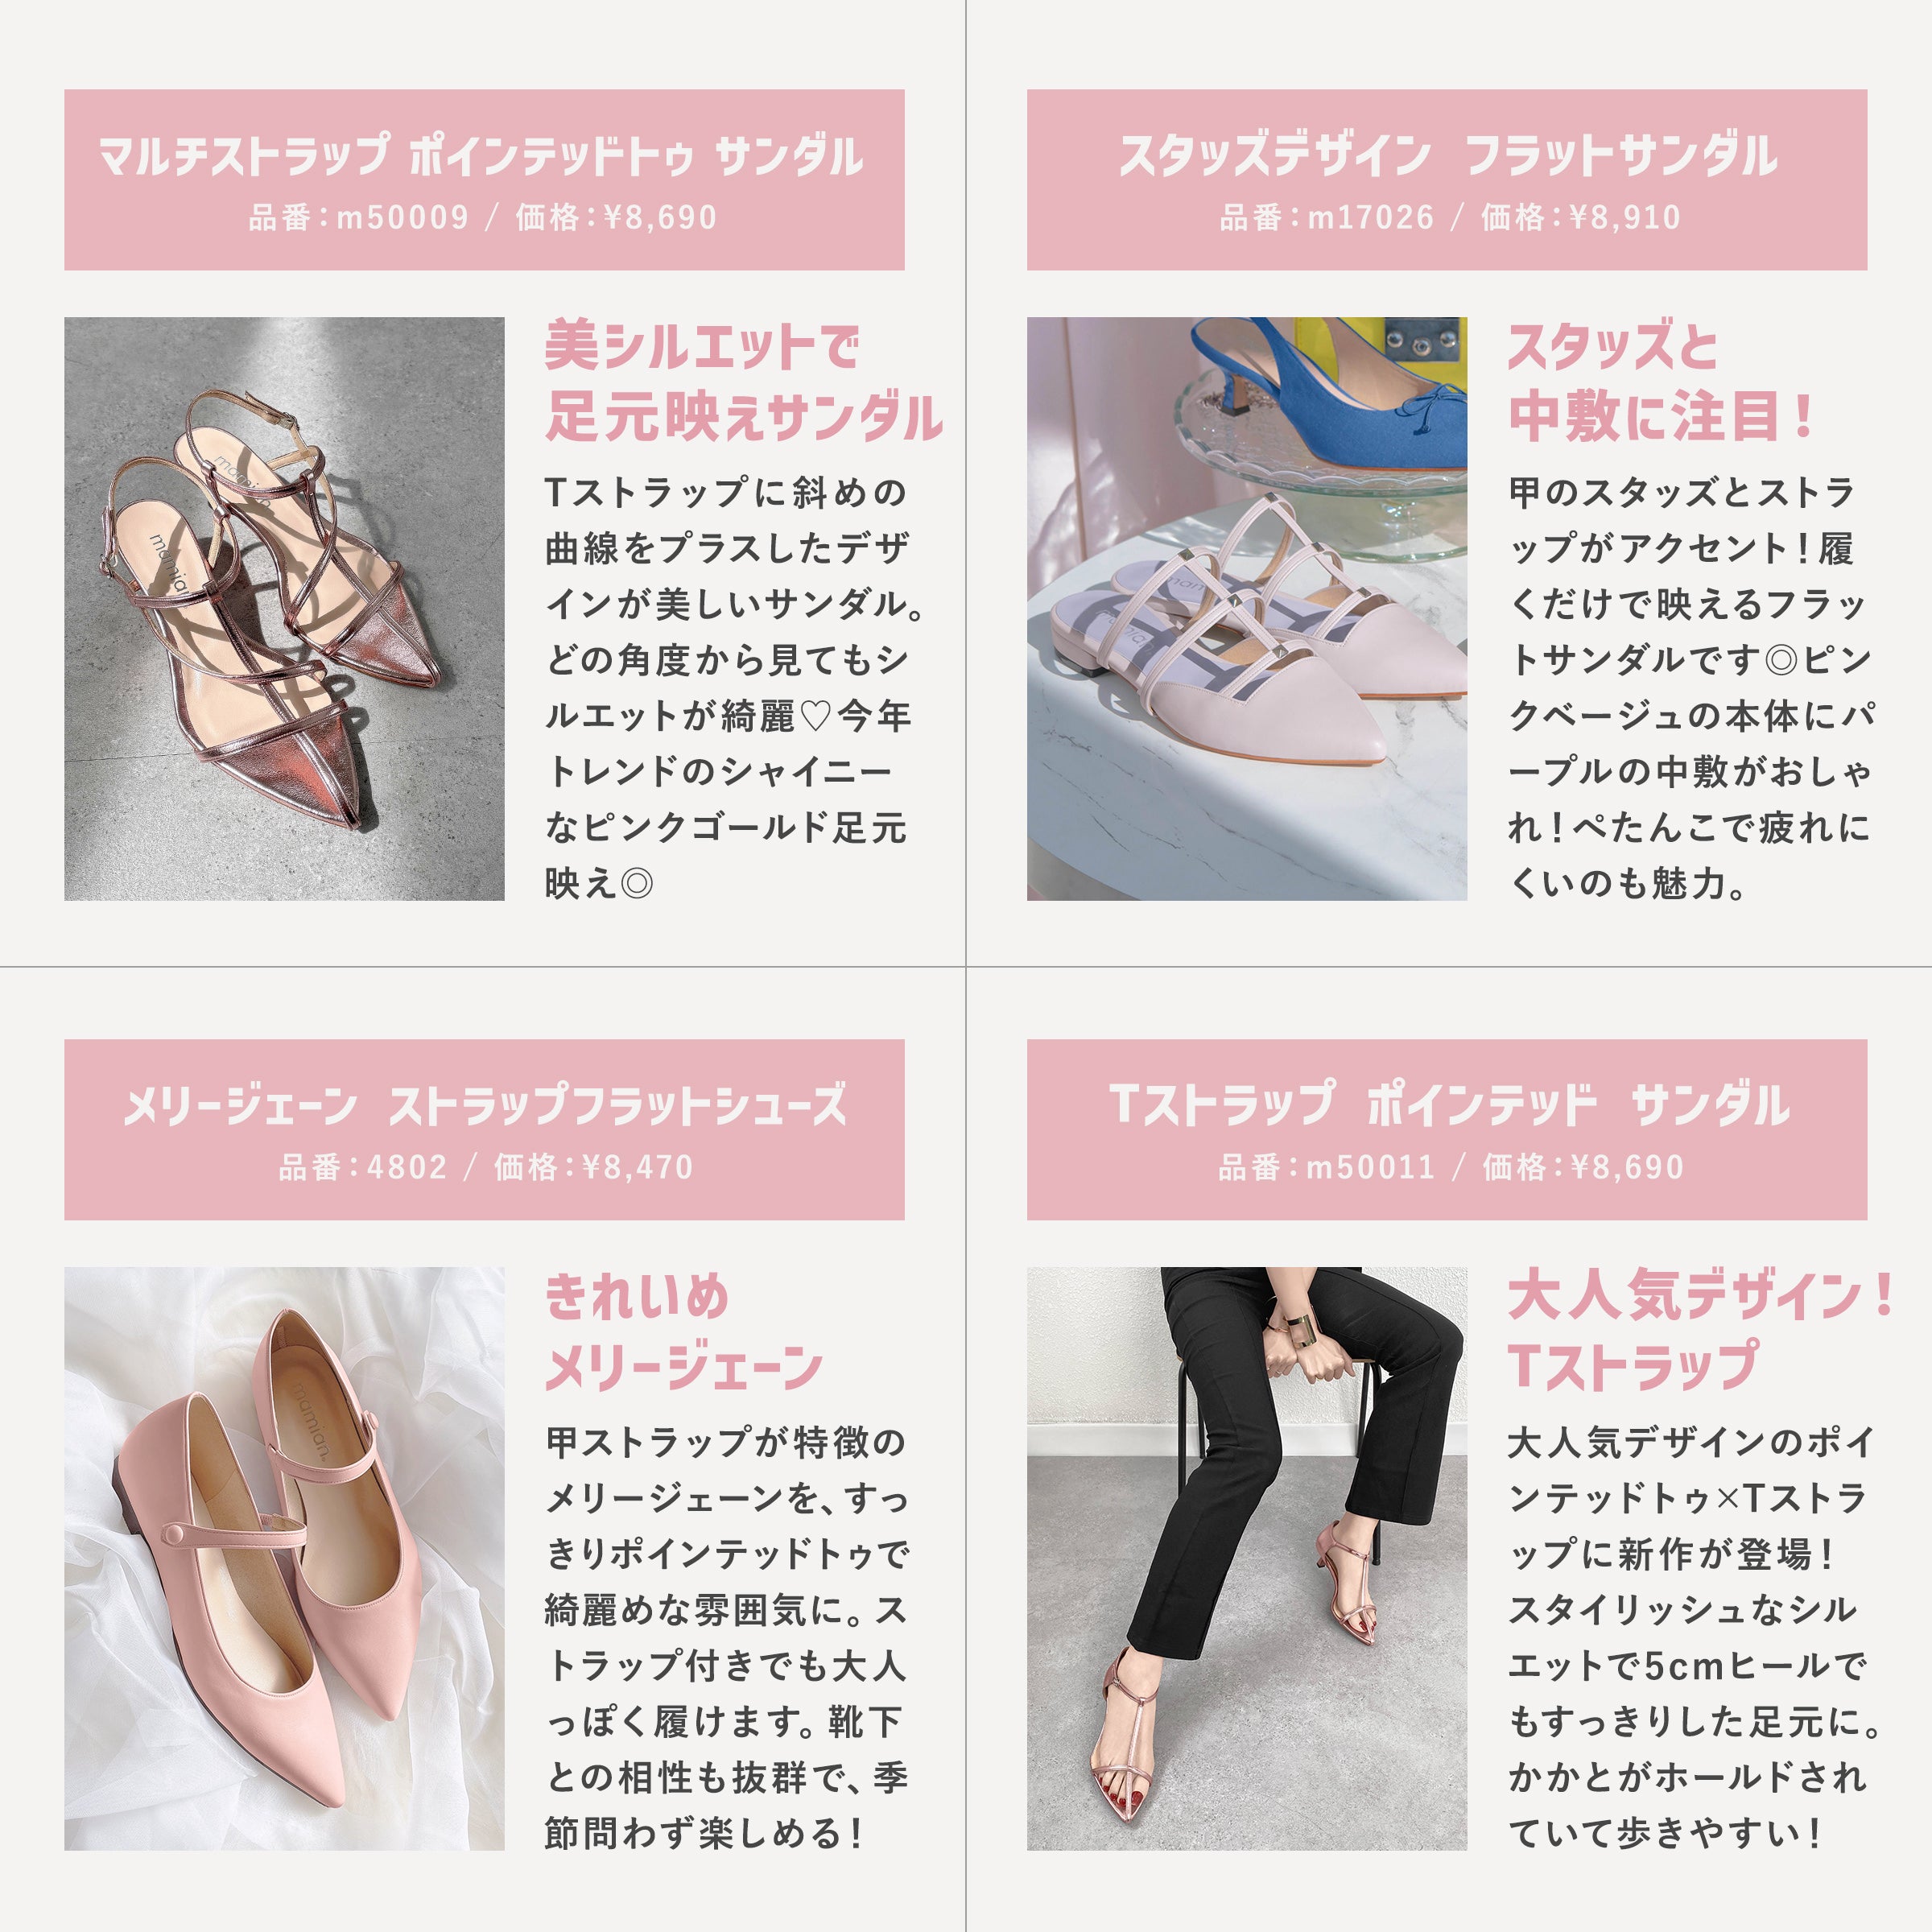 Perfect for spring ♡ Pink shoes special feature